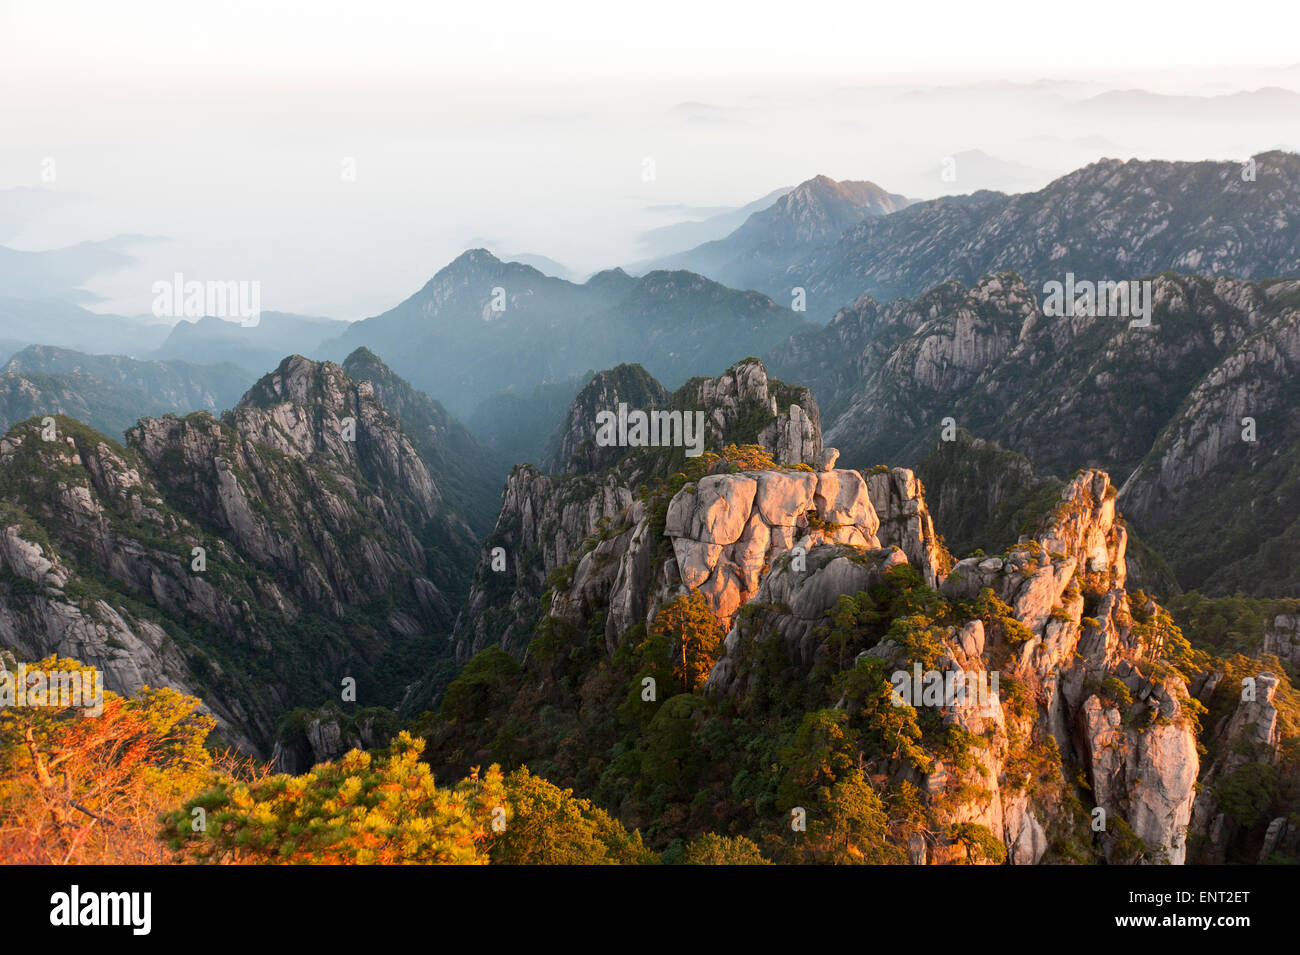 Morning atmosphere, fog, bizarre towering rocks and mountains covered with scattered trees, Huangshan Pines (Pinus Stock Photo